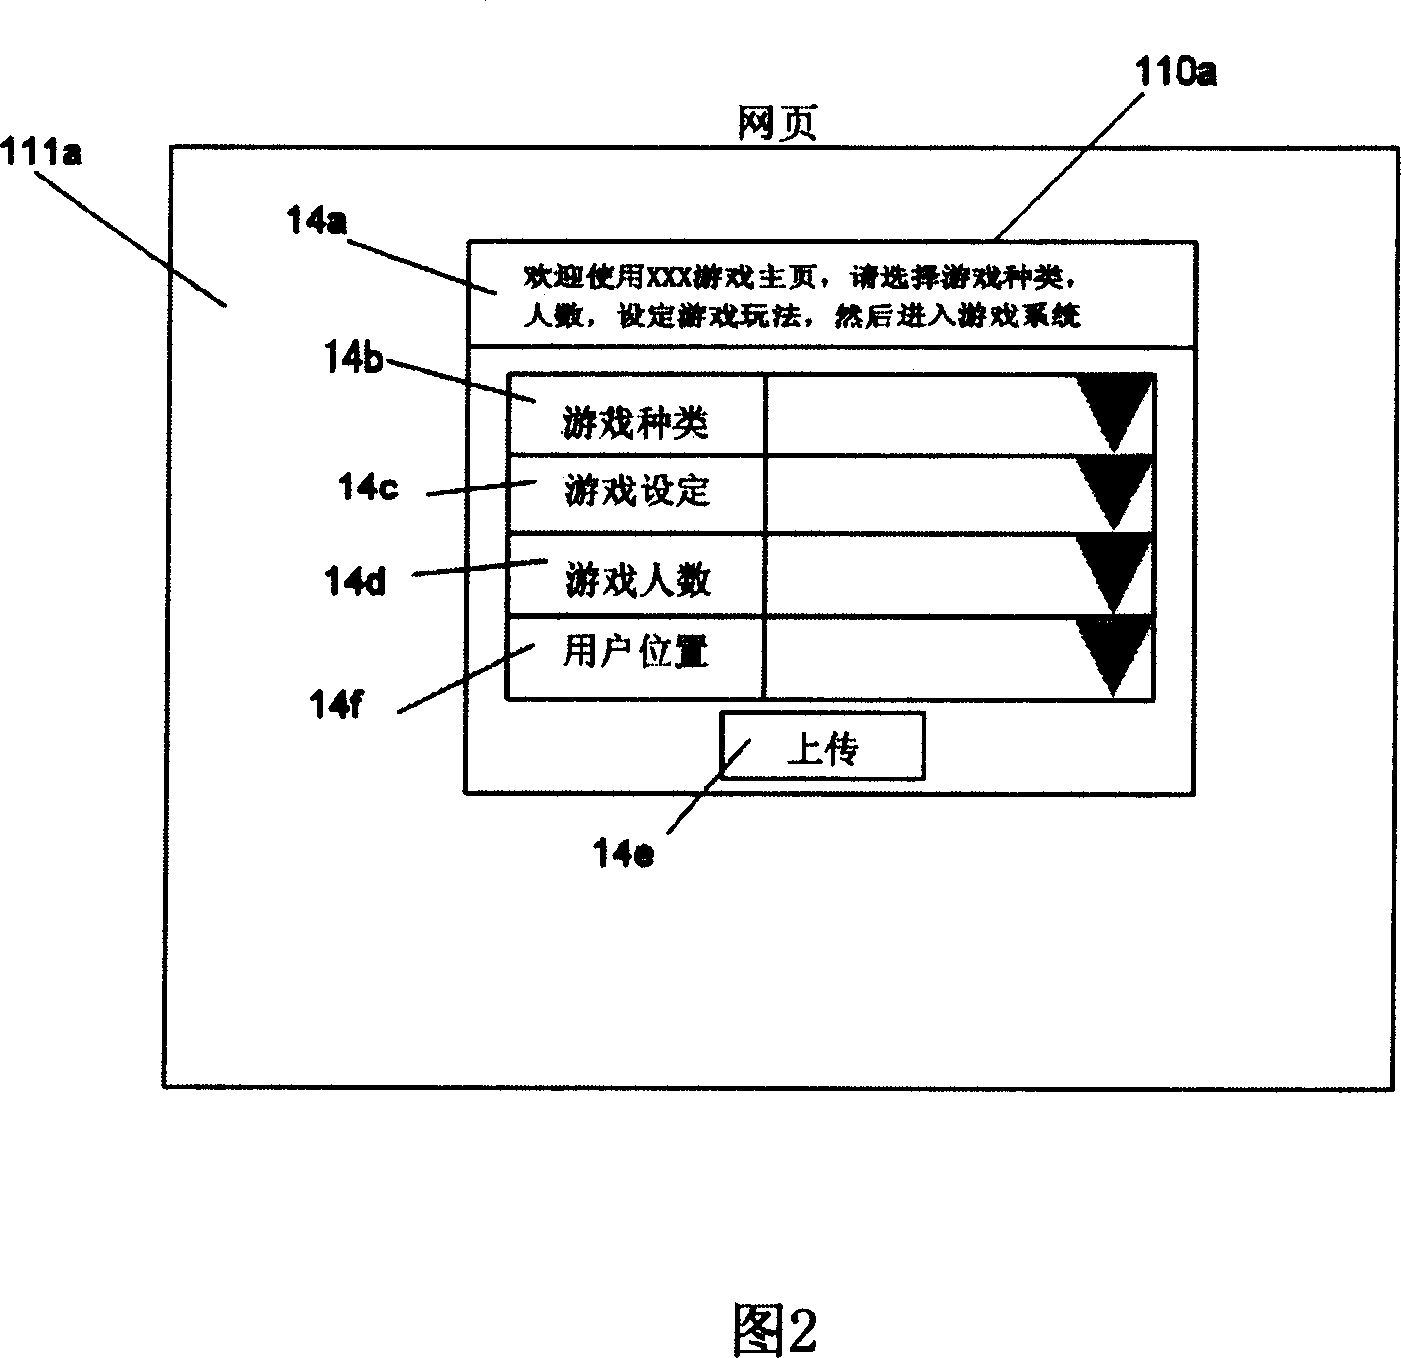 Electron motion game system based on network and method thereof